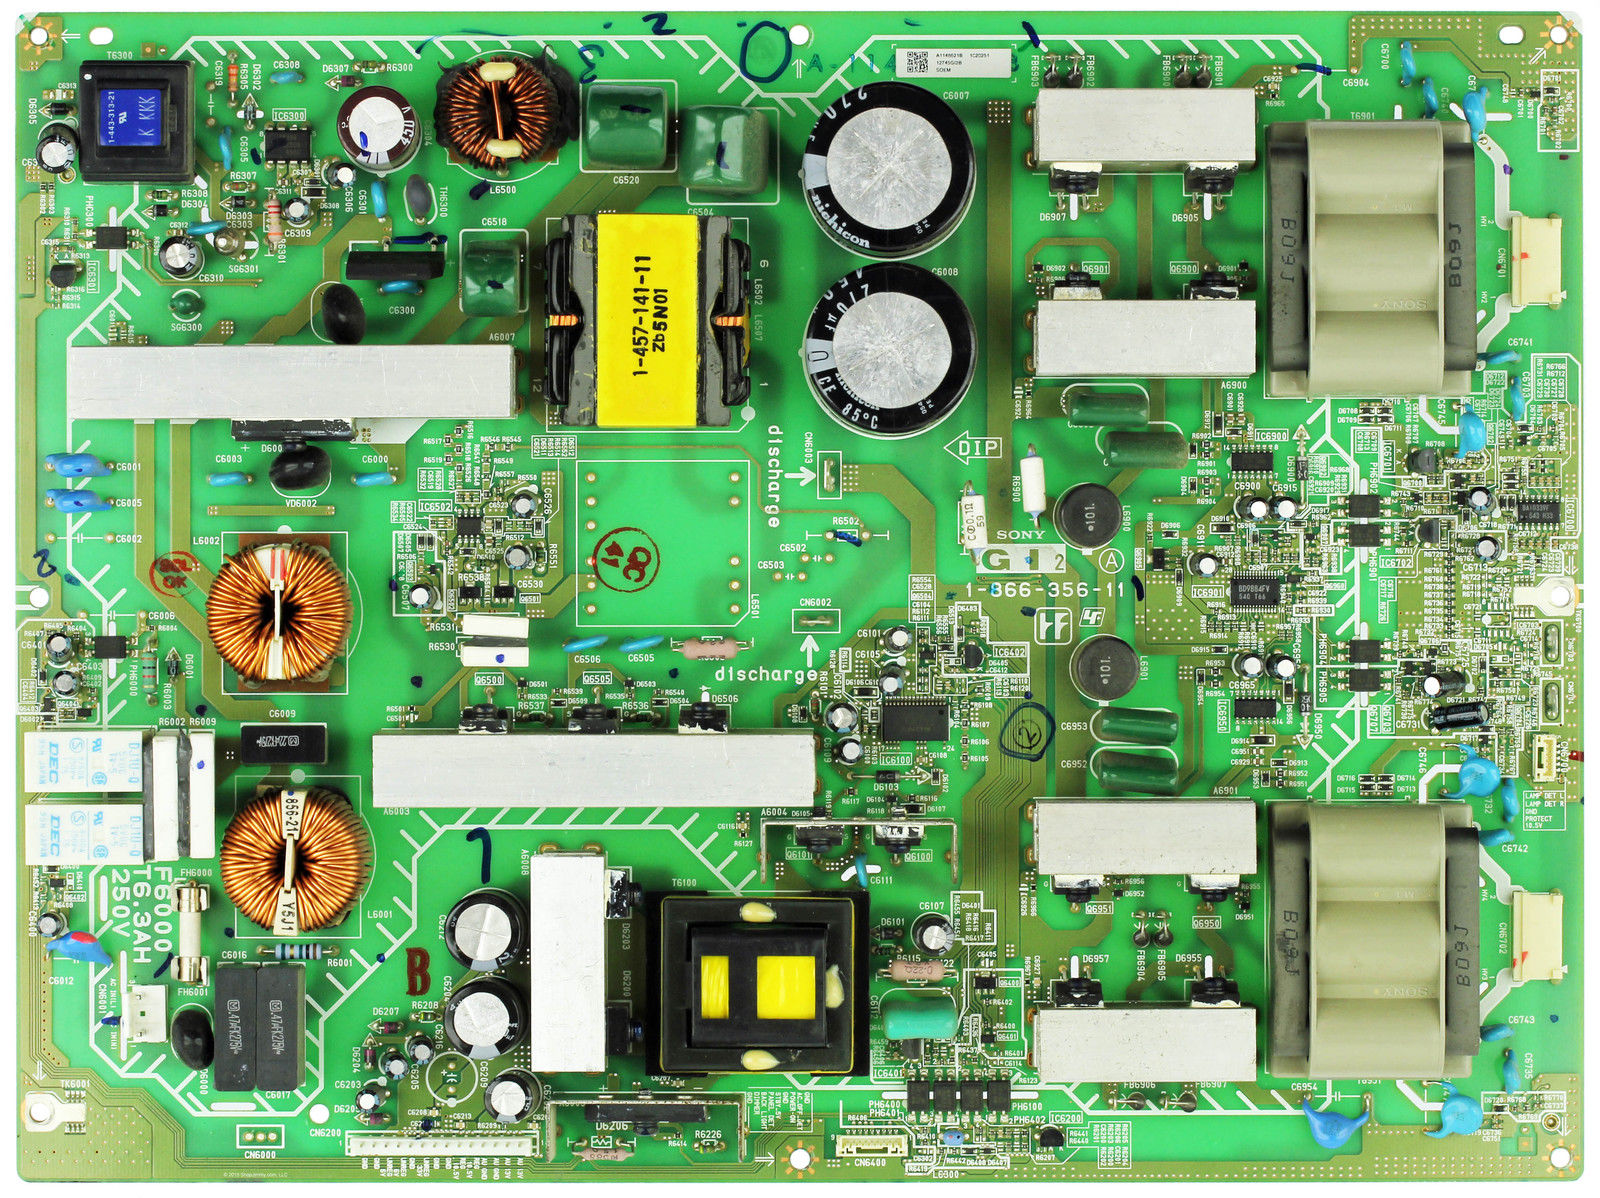 Sony (1-866-356-11) A-1148-621-B GI2 Board for KDL-V40XBR1 - Click Image to Close